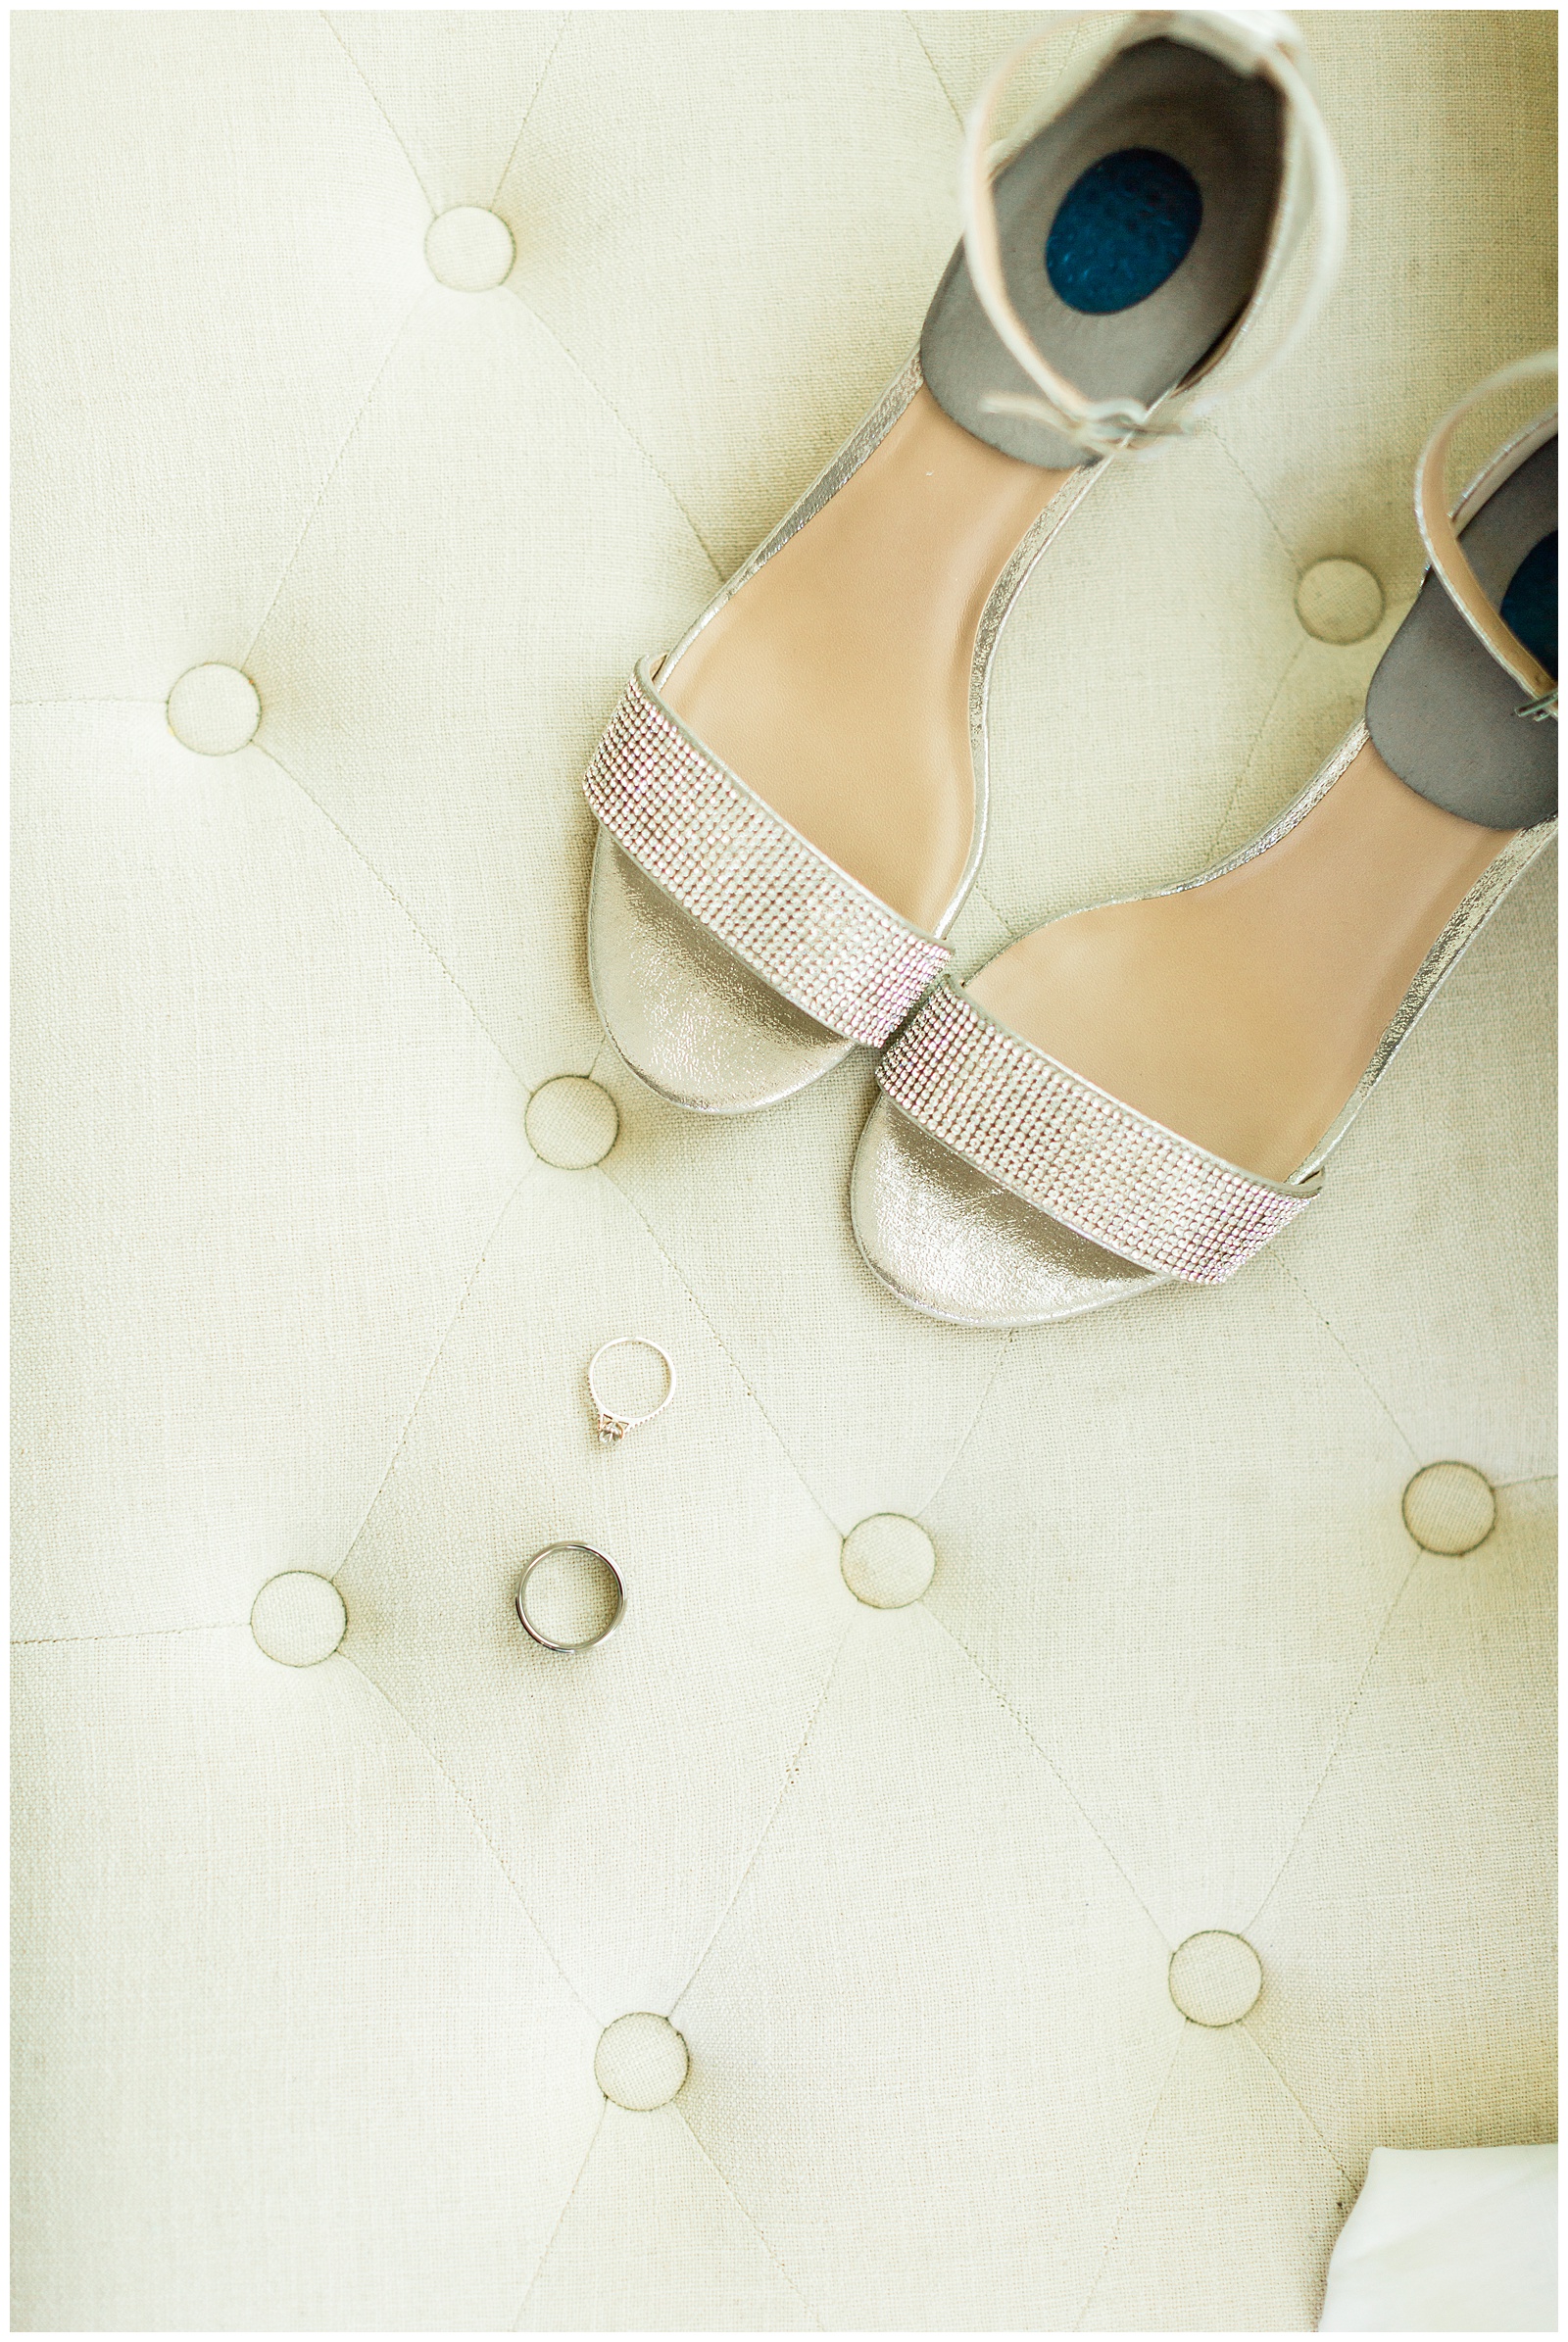 bridal shoes and wedding ring detail photo